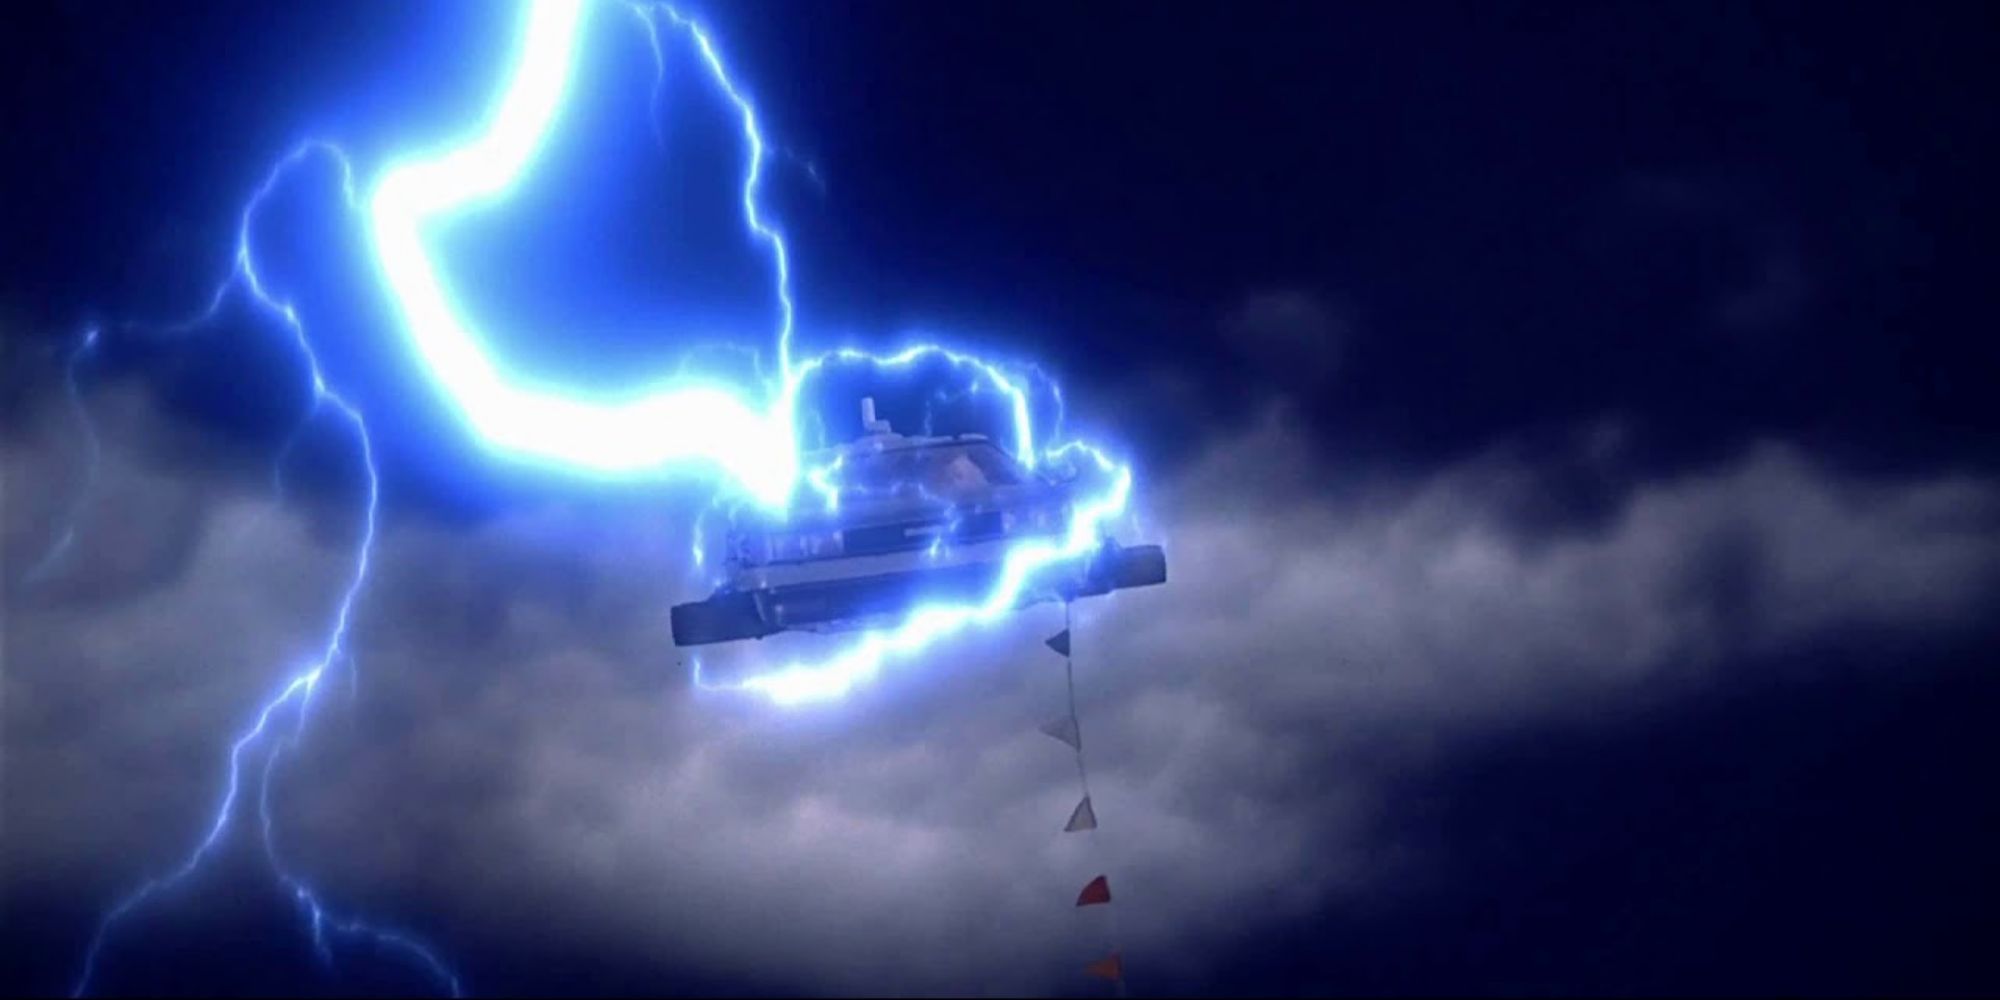 The Delorean getting struck by lightning in the air in Back to the Future Part 2